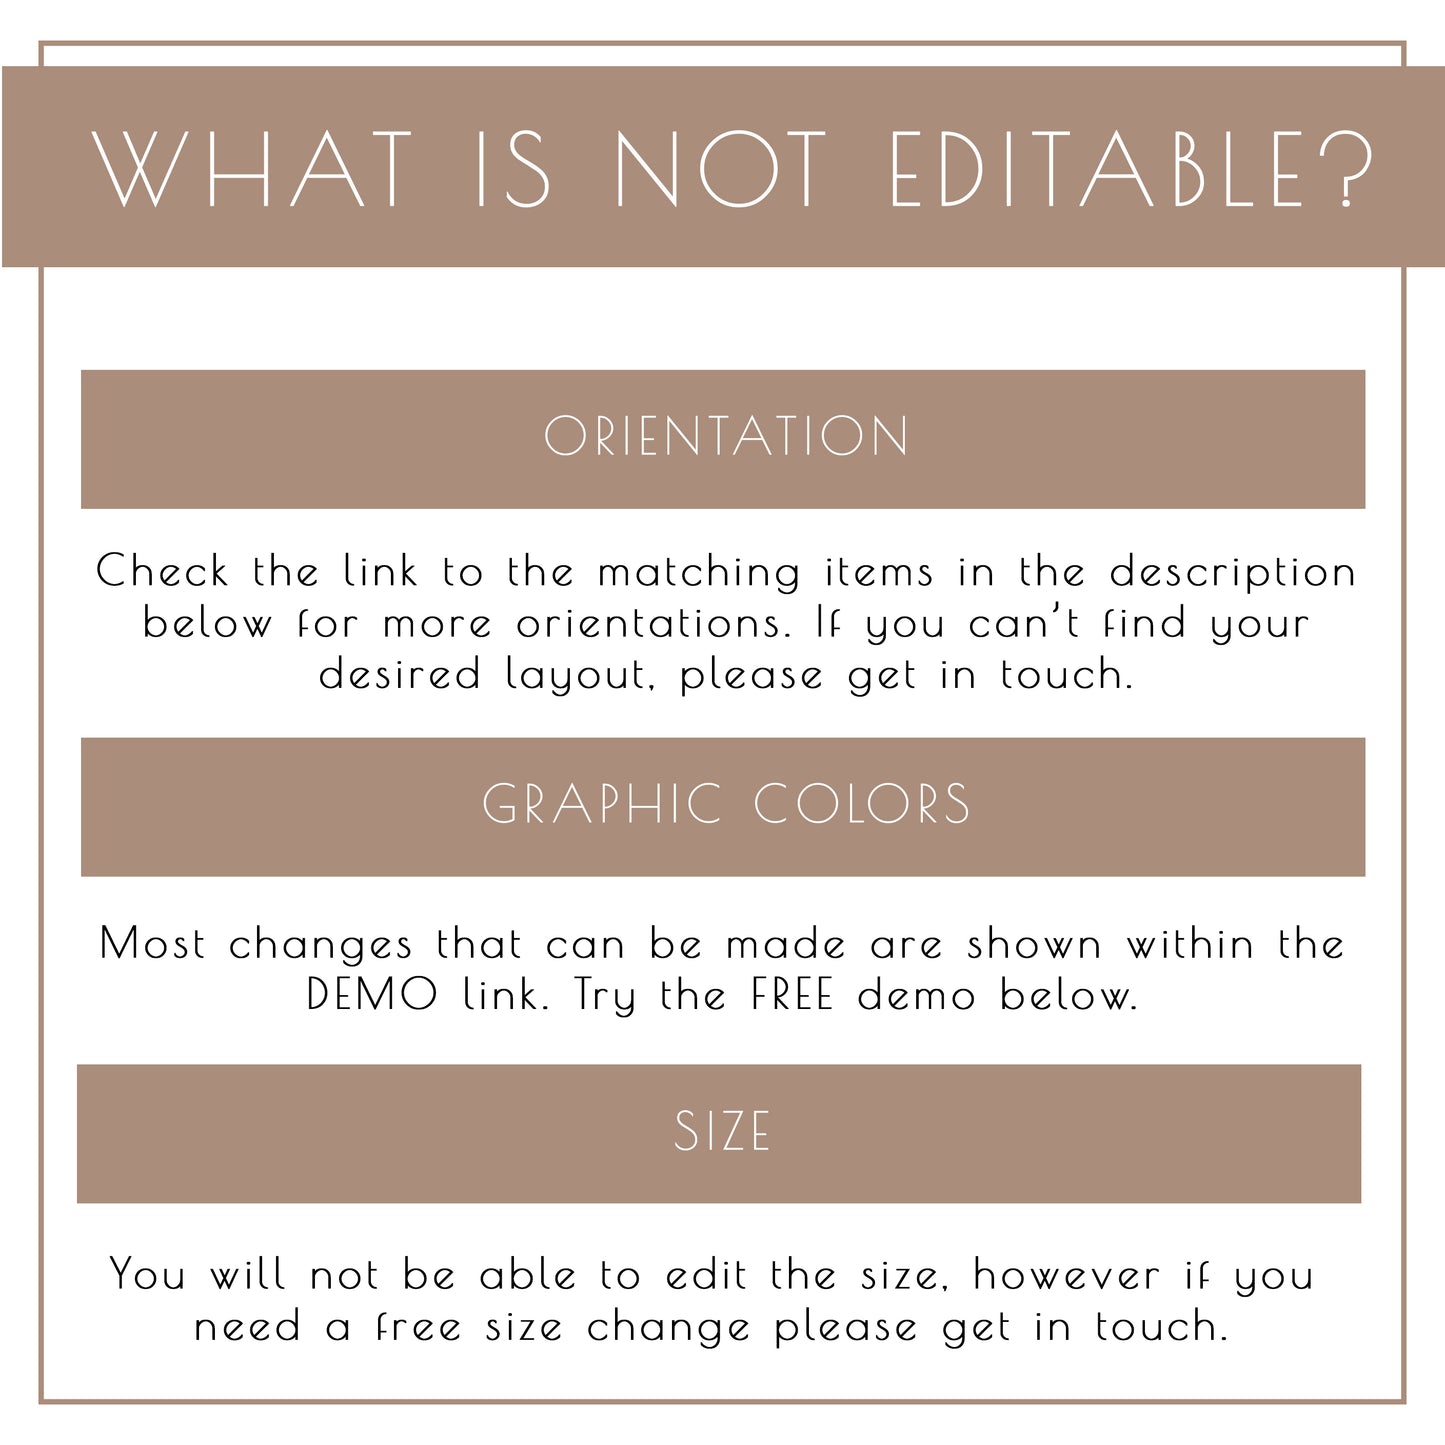 what is not editable on your templates: orientation, graphic colors, size